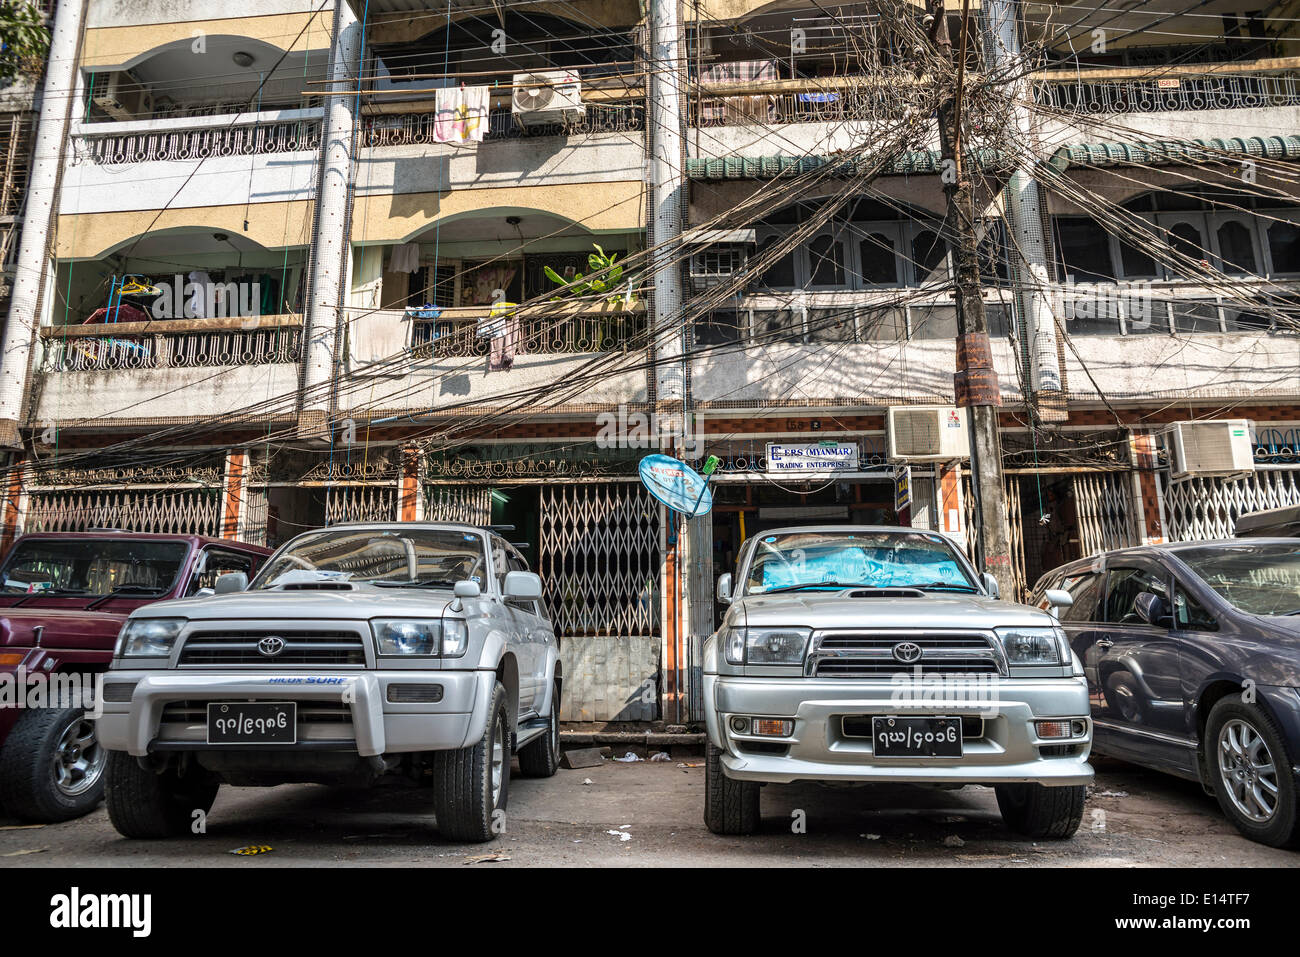 Vehicles parked in front of a residential building, tangled cables, power lines, Yangon or Rangoon, Yangon Region, Myanmar Stock Photo